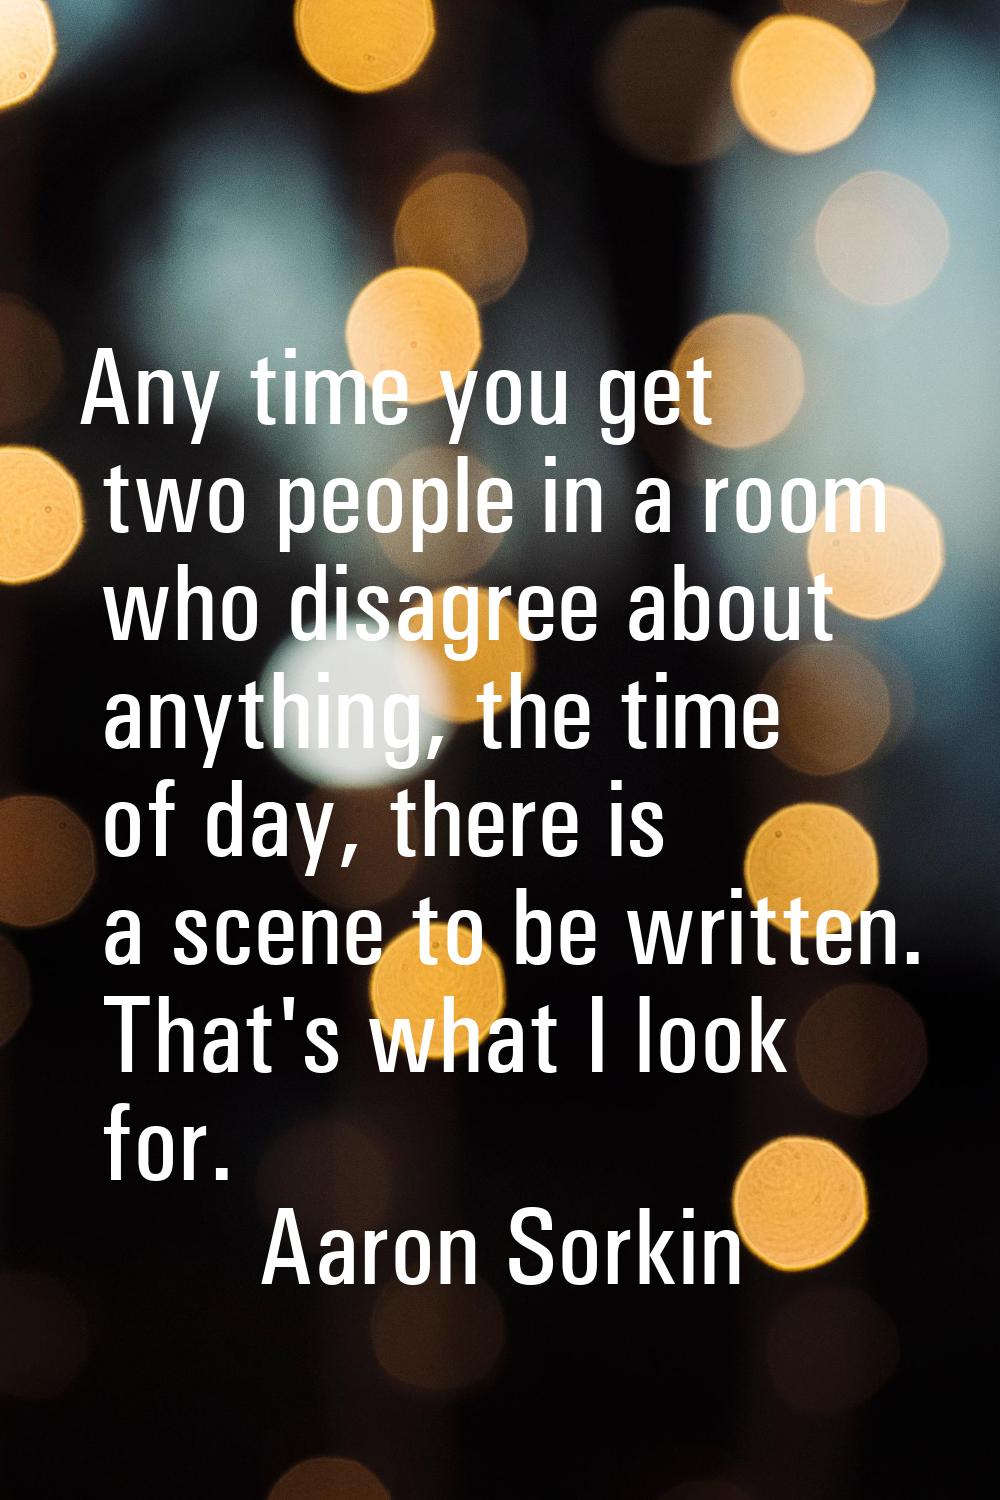 Any time you get two people in a room who disagree about anything, the time of day, there is a scen